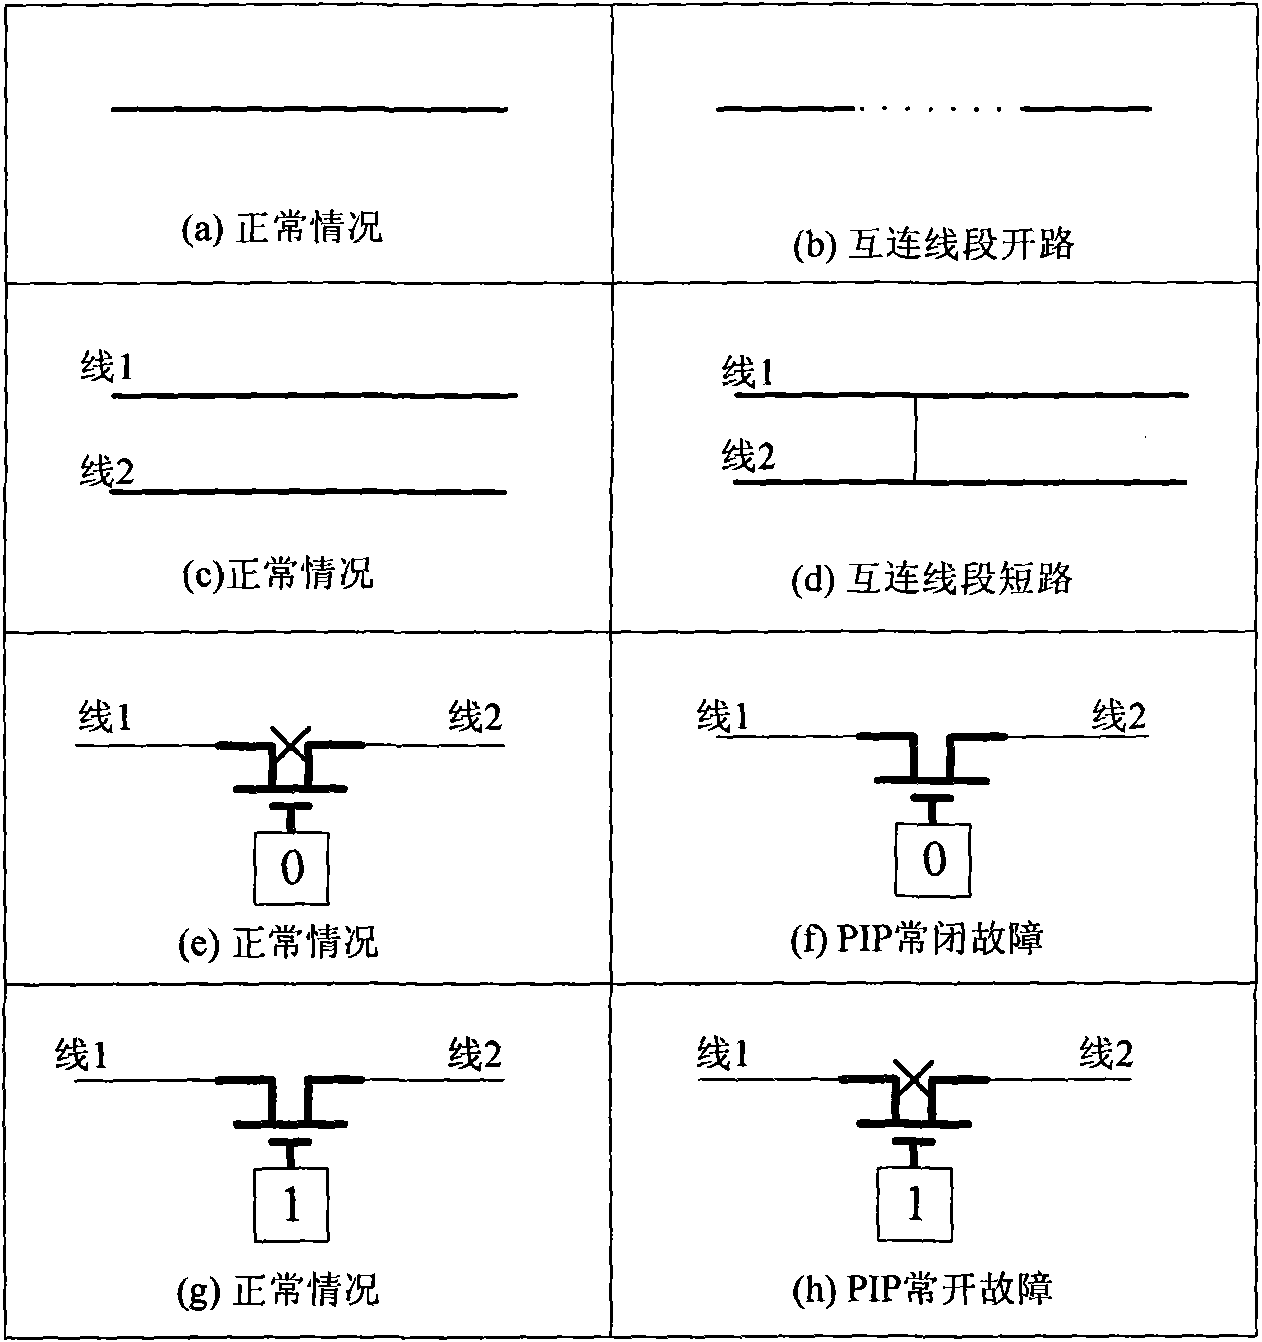 Fault testing method for interconnection resource of programmable logic device